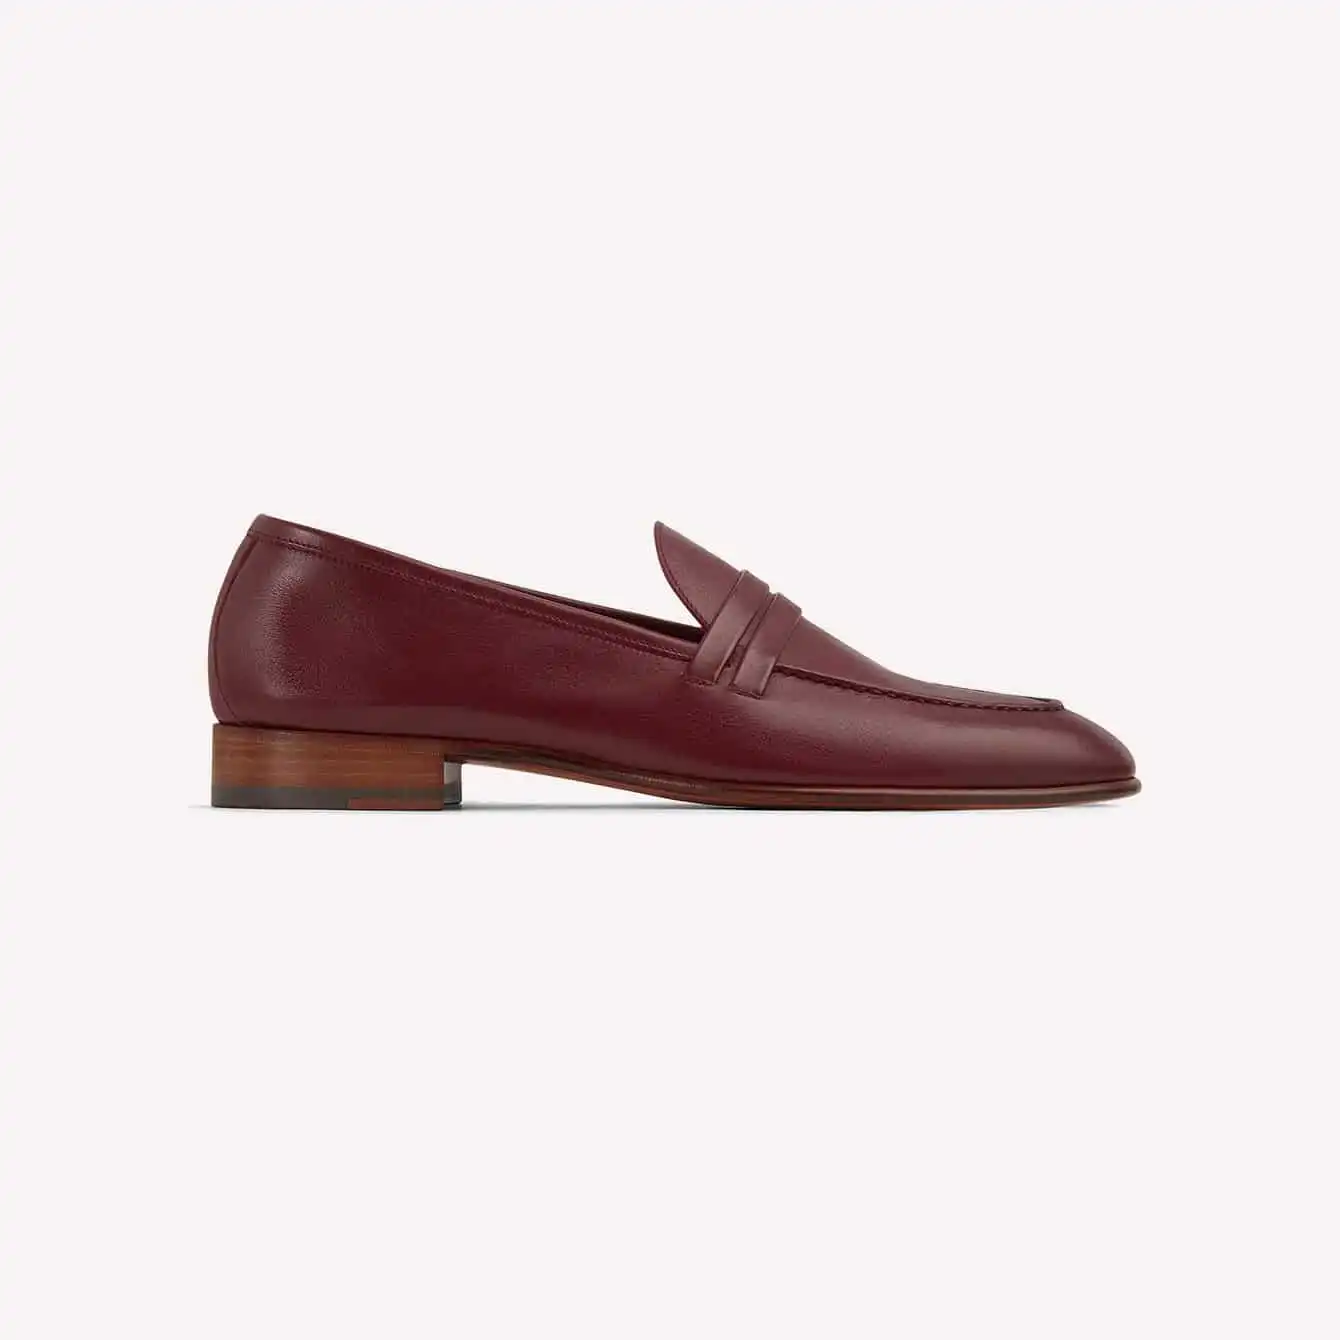 Malone Souliers - Luca Leather Loafer Burgundy